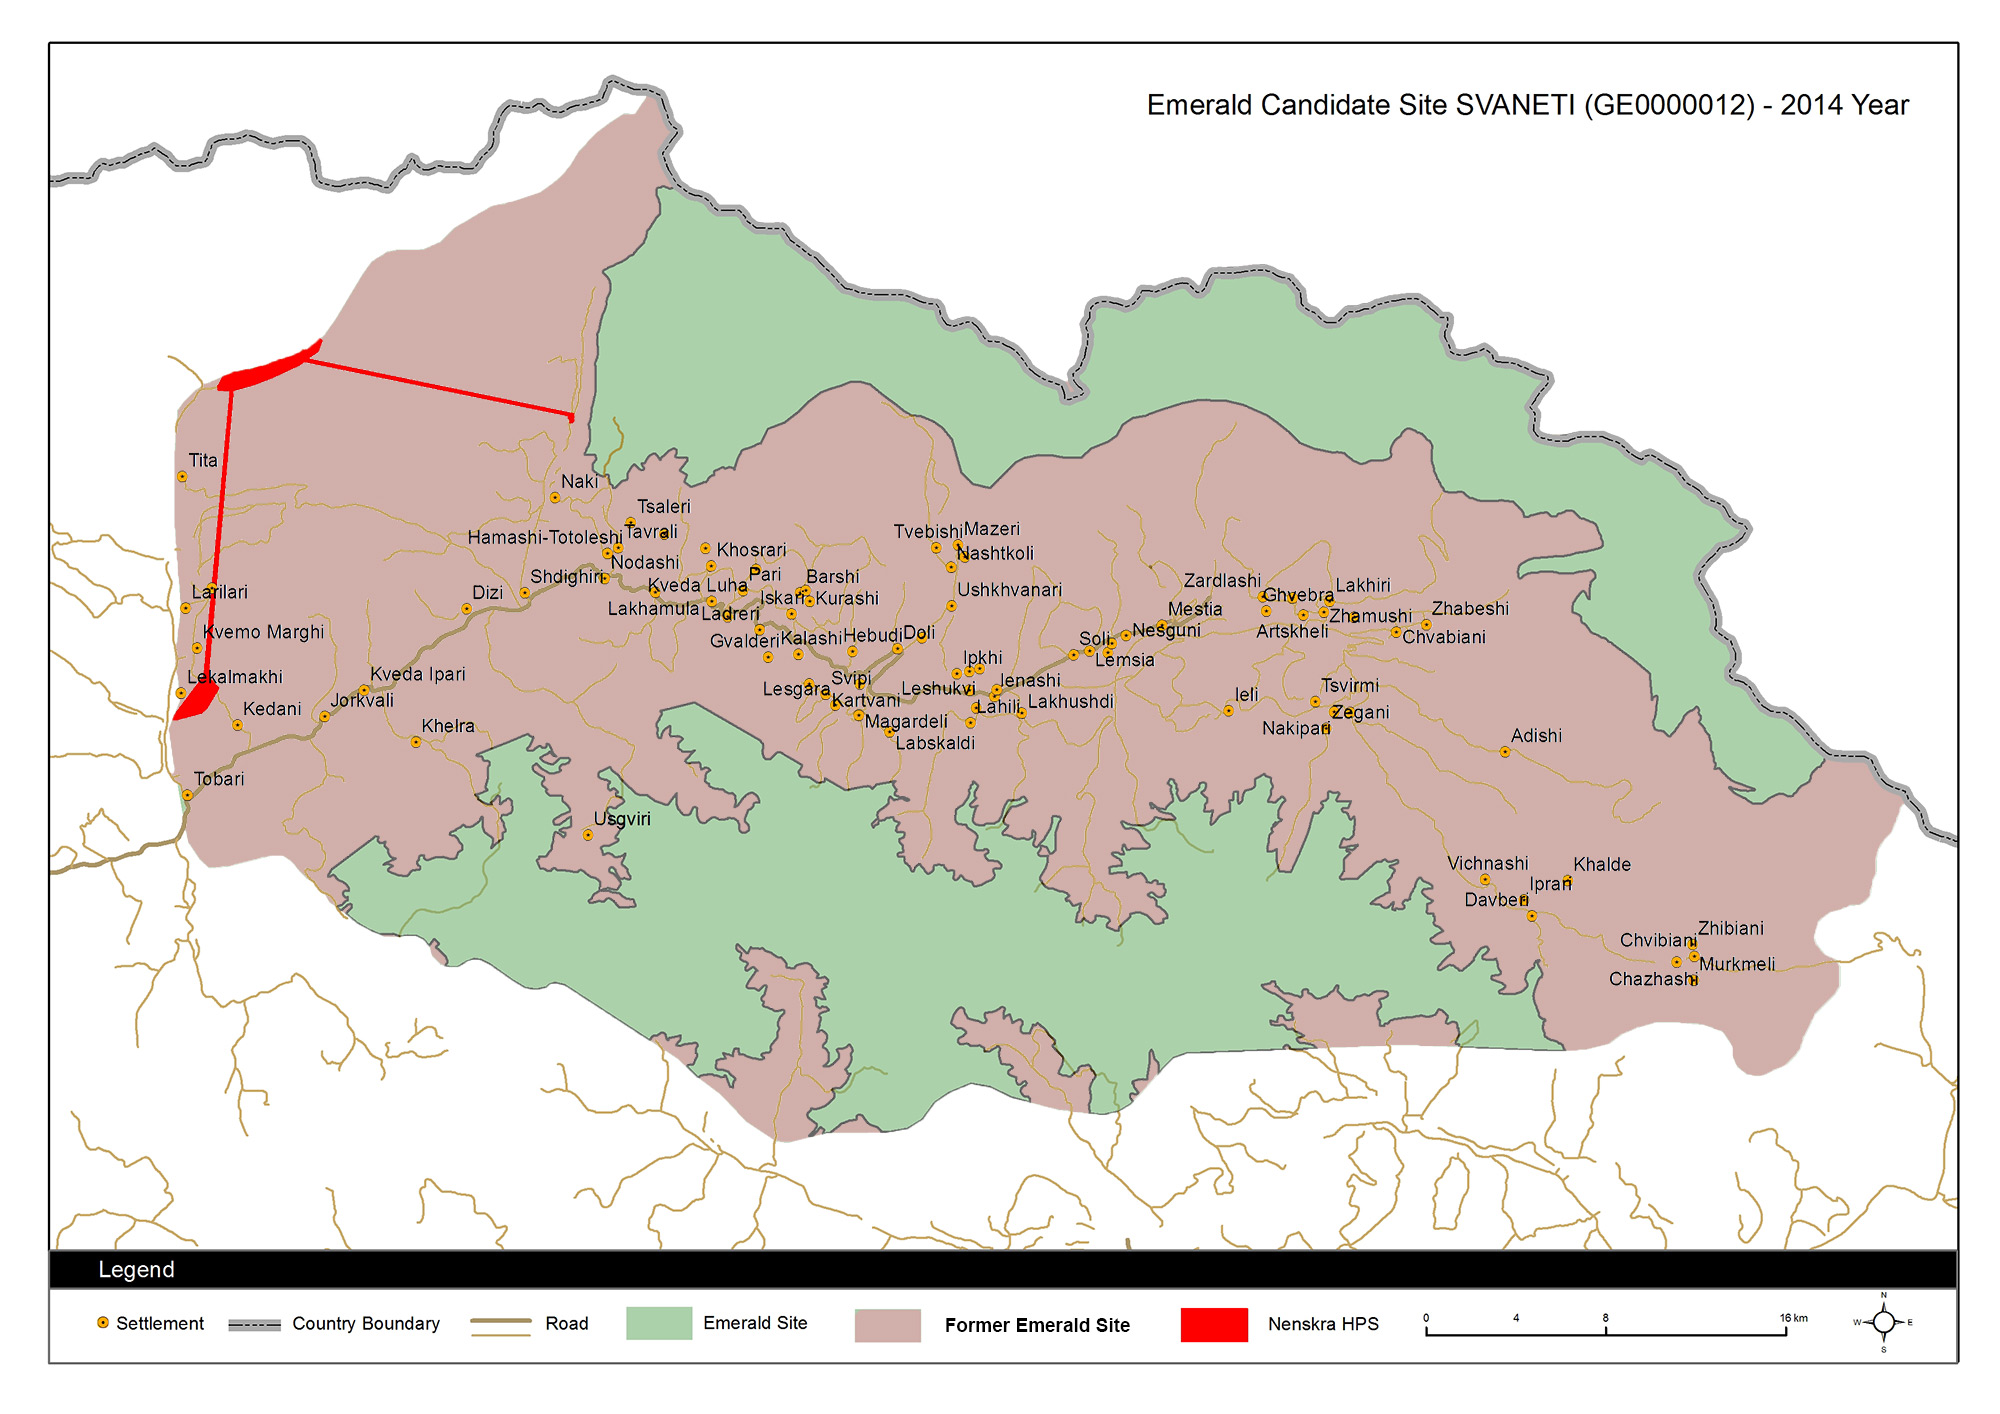 A map with a red and a green area. The large red area marks the part that has been removed by Georgia's government from the Candidate Emerald site Svaneti 1.